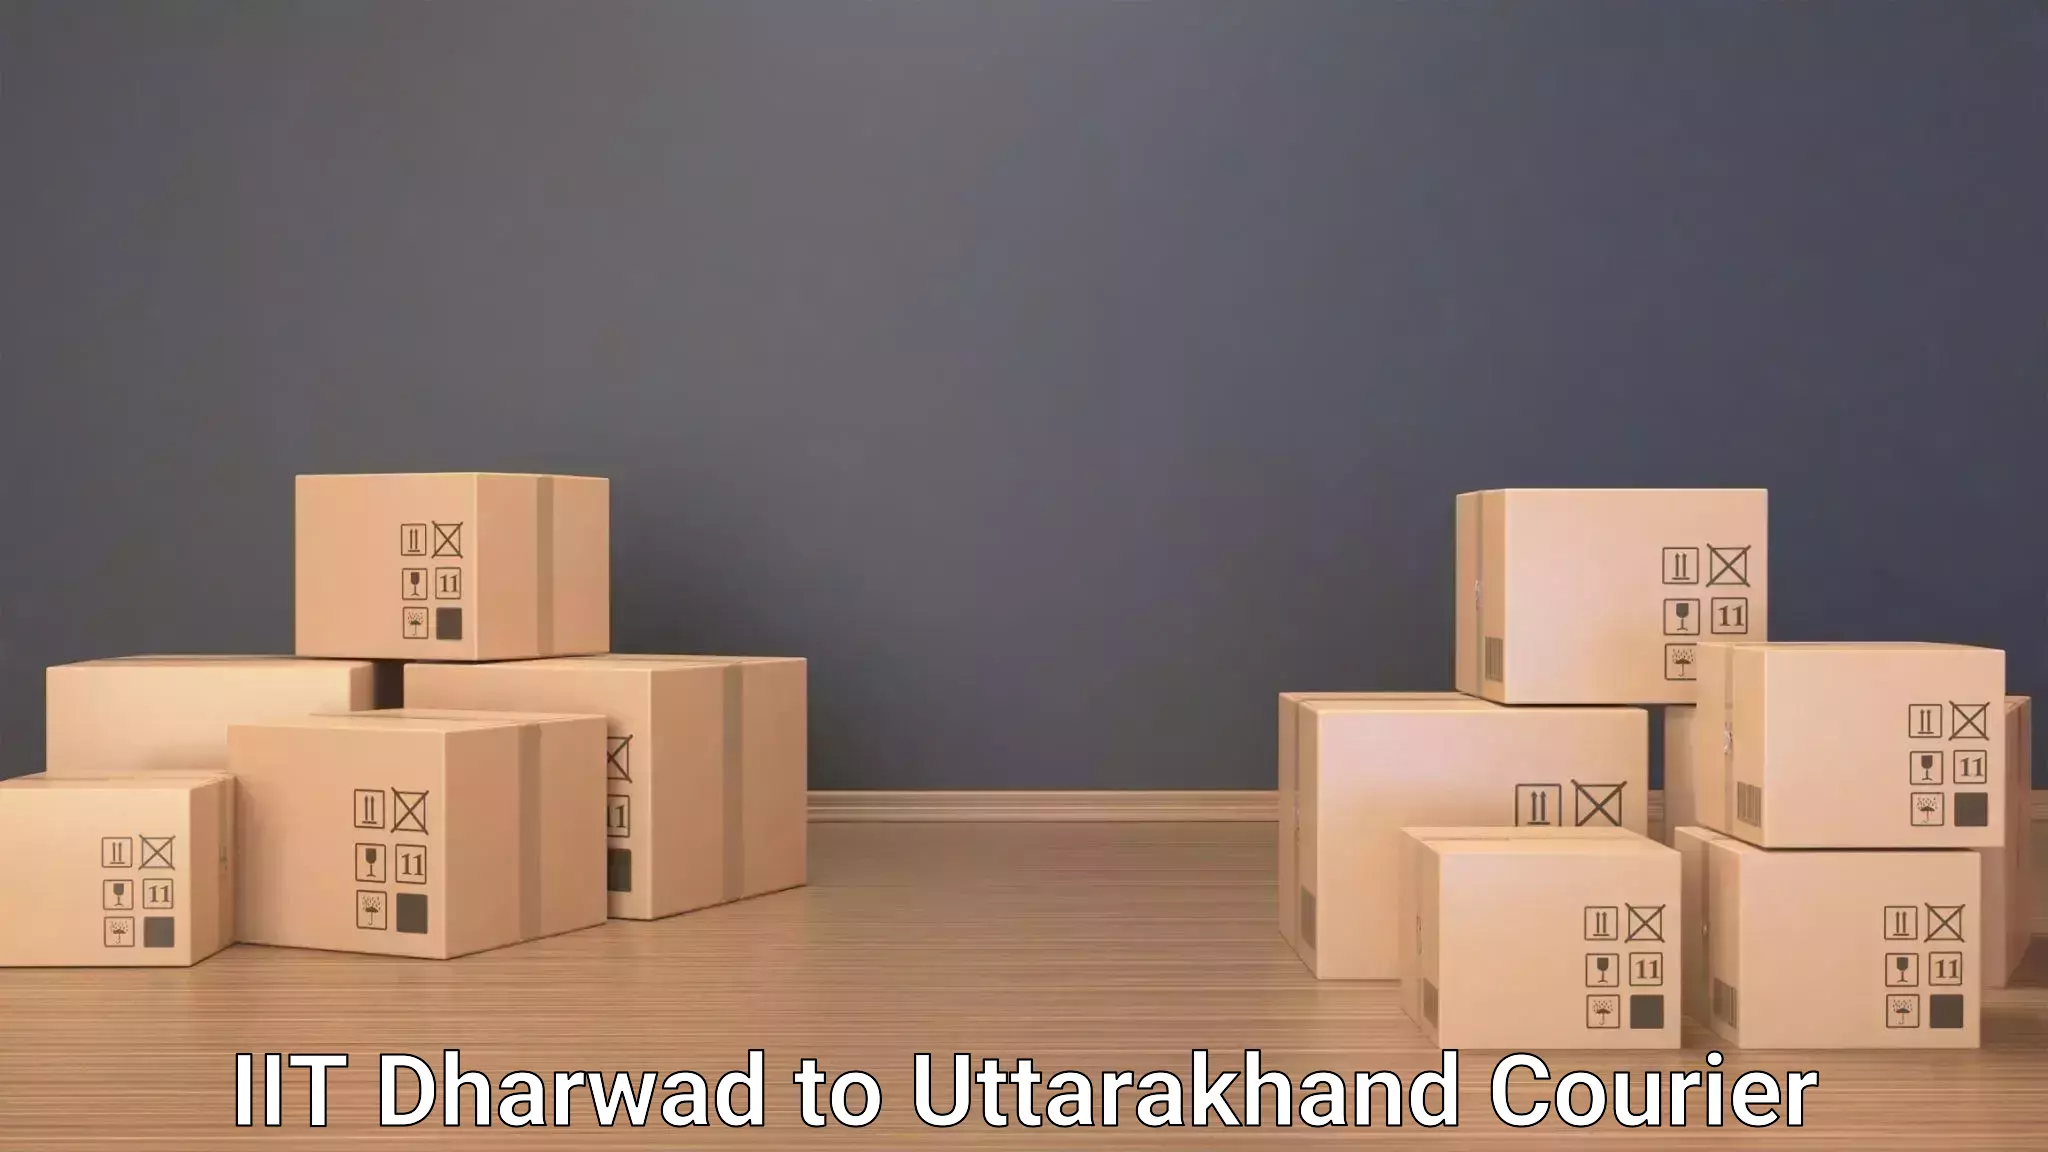 Luggage transport consultancy IIT Dharwad to Tehri